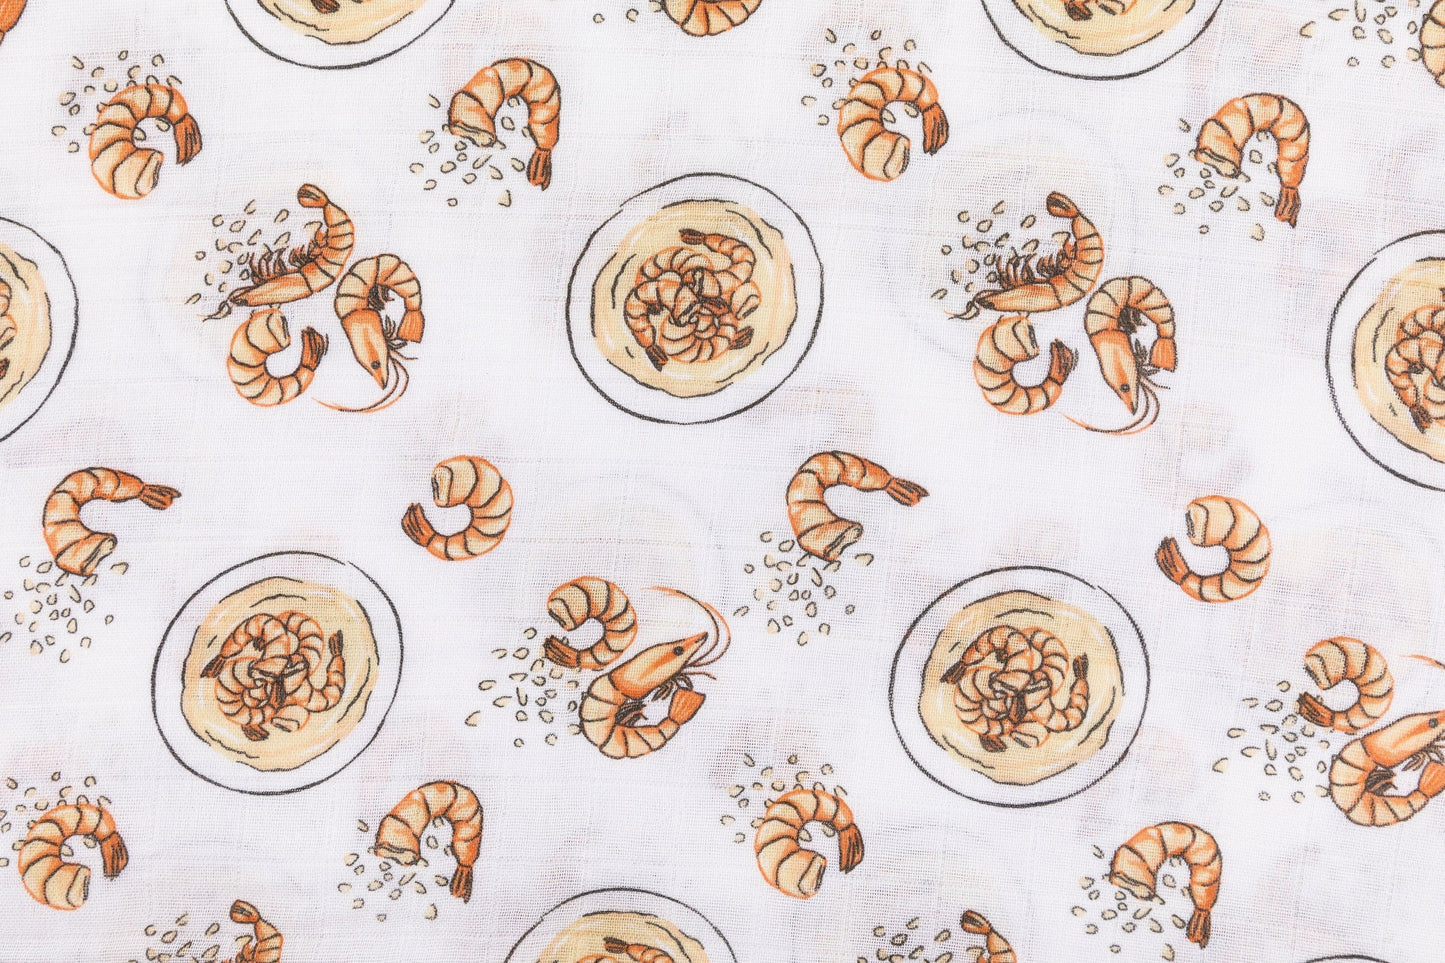 White muslin swaddle blanket with colorful shrimp and grits pattern, featuring bowls, shrimp, and corn.